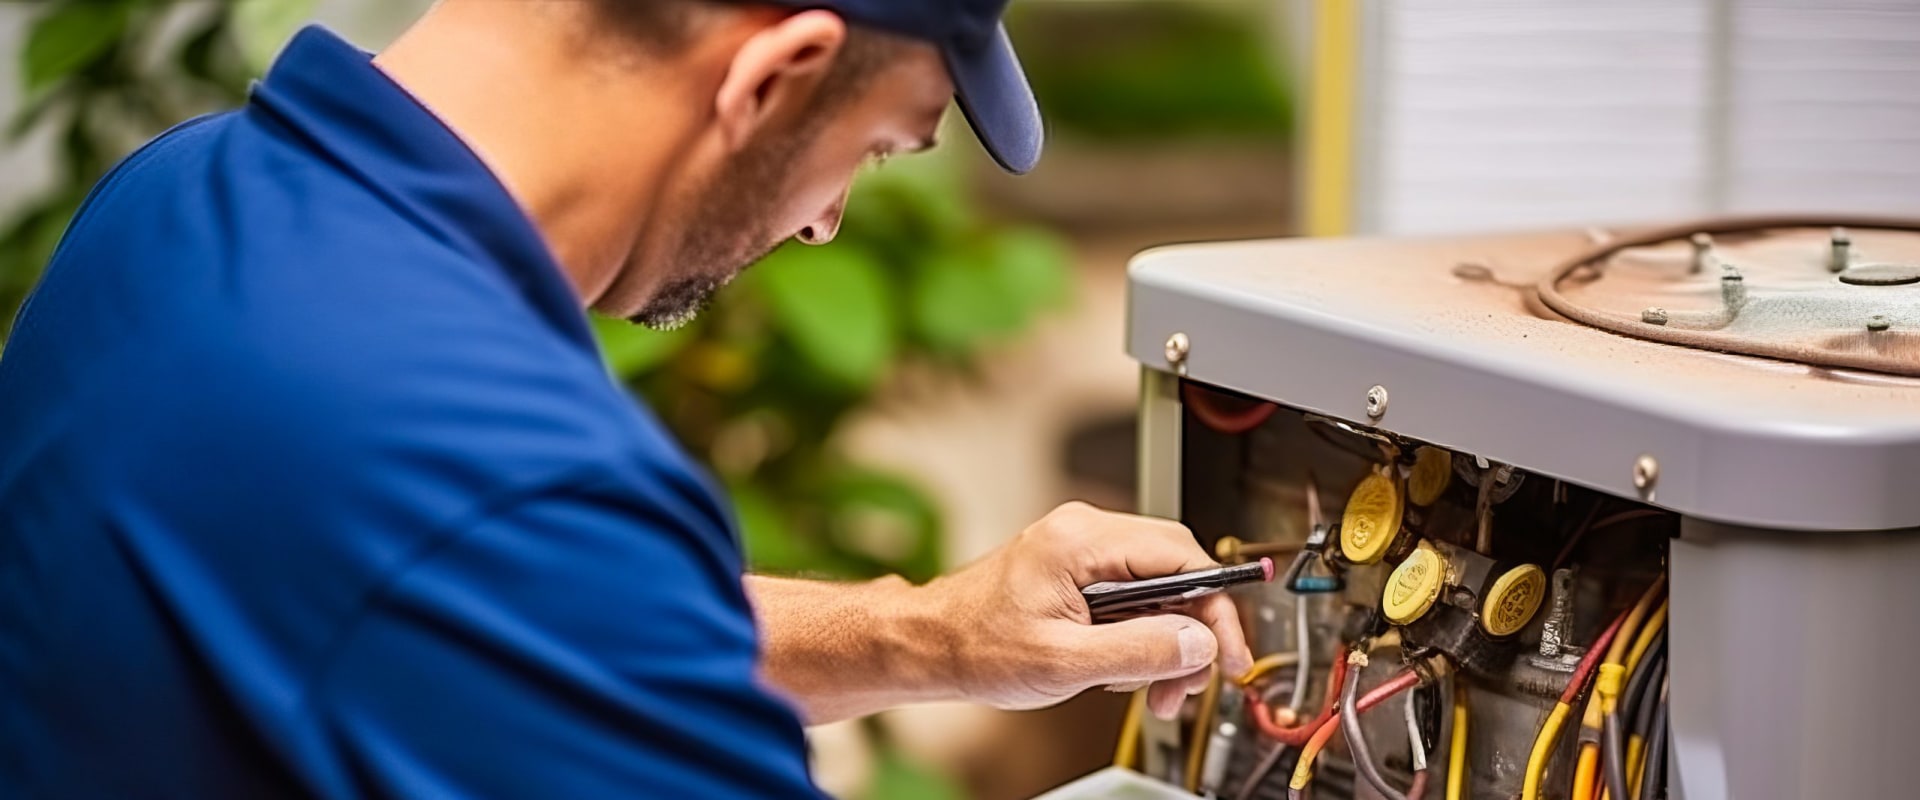 Fine-Tuning Comfort with Professional HVAC Tune Up Service in Parkland FL